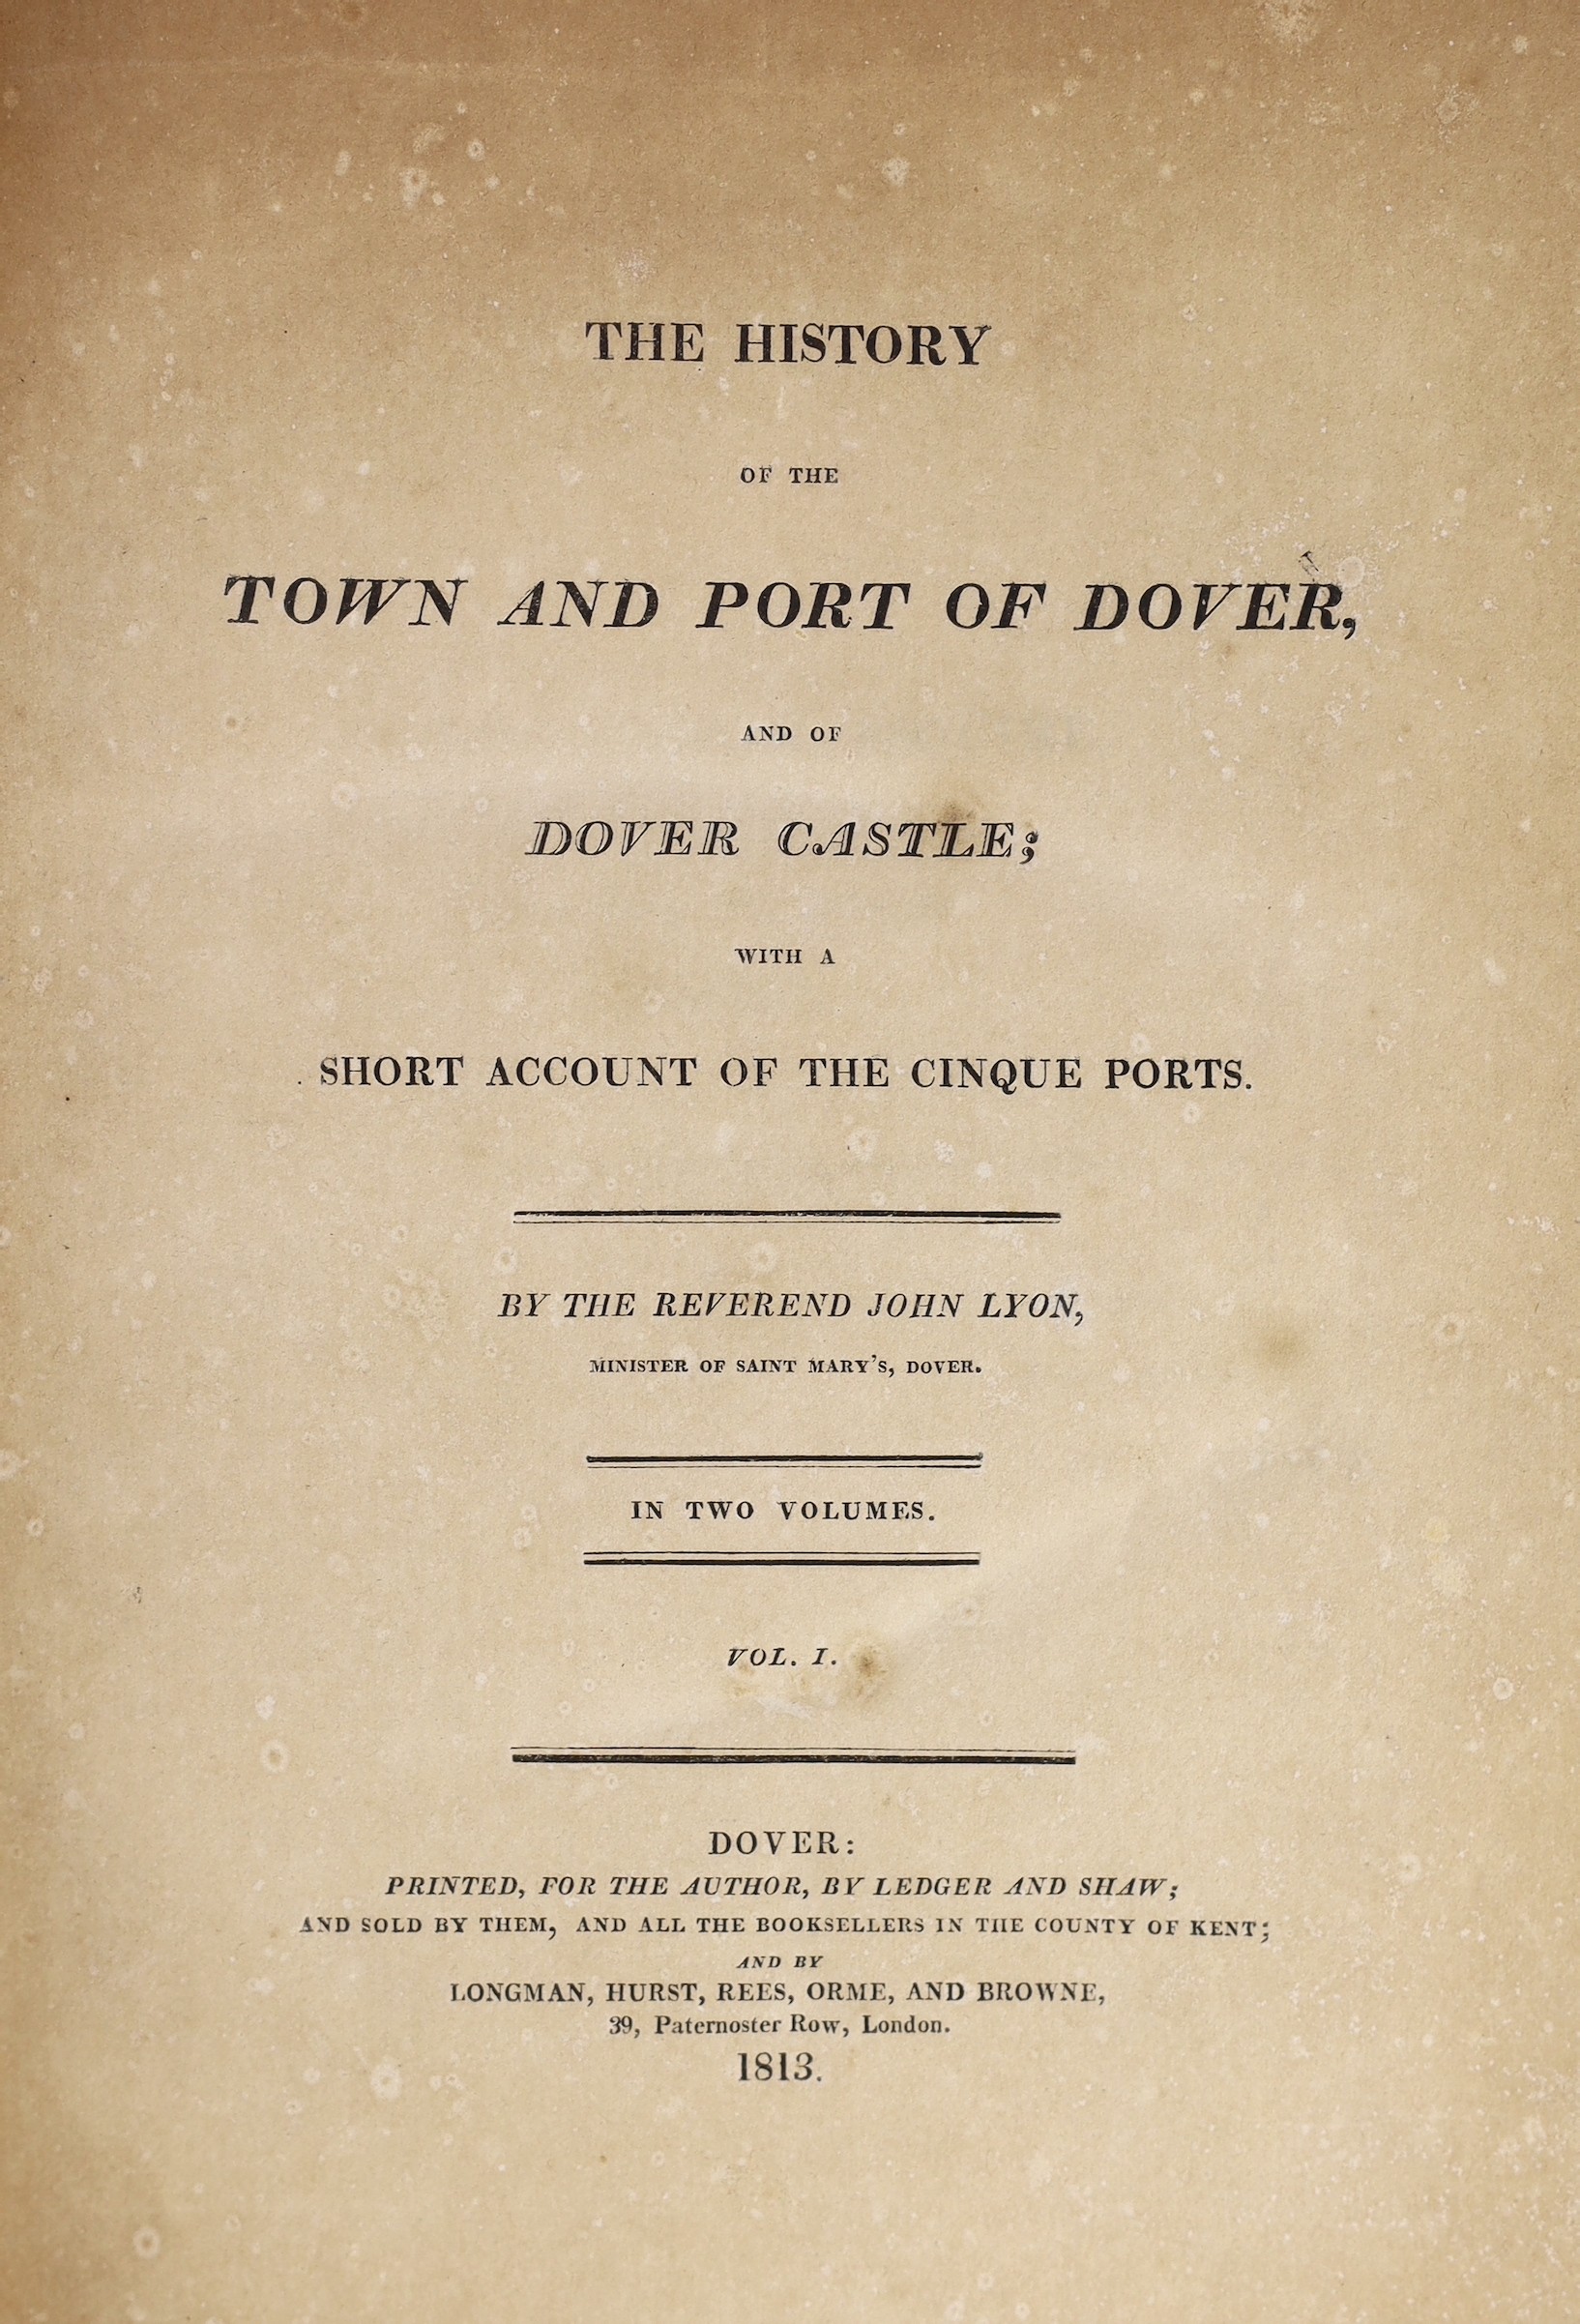 DOVER: Lyon, Rev. John - The History of the Town and Port of Dover ... with a short account of the Cinque Ports. 2 vols. 18 plates and plans (mostly folded), subscribers list; original paper boards and later cloth spines